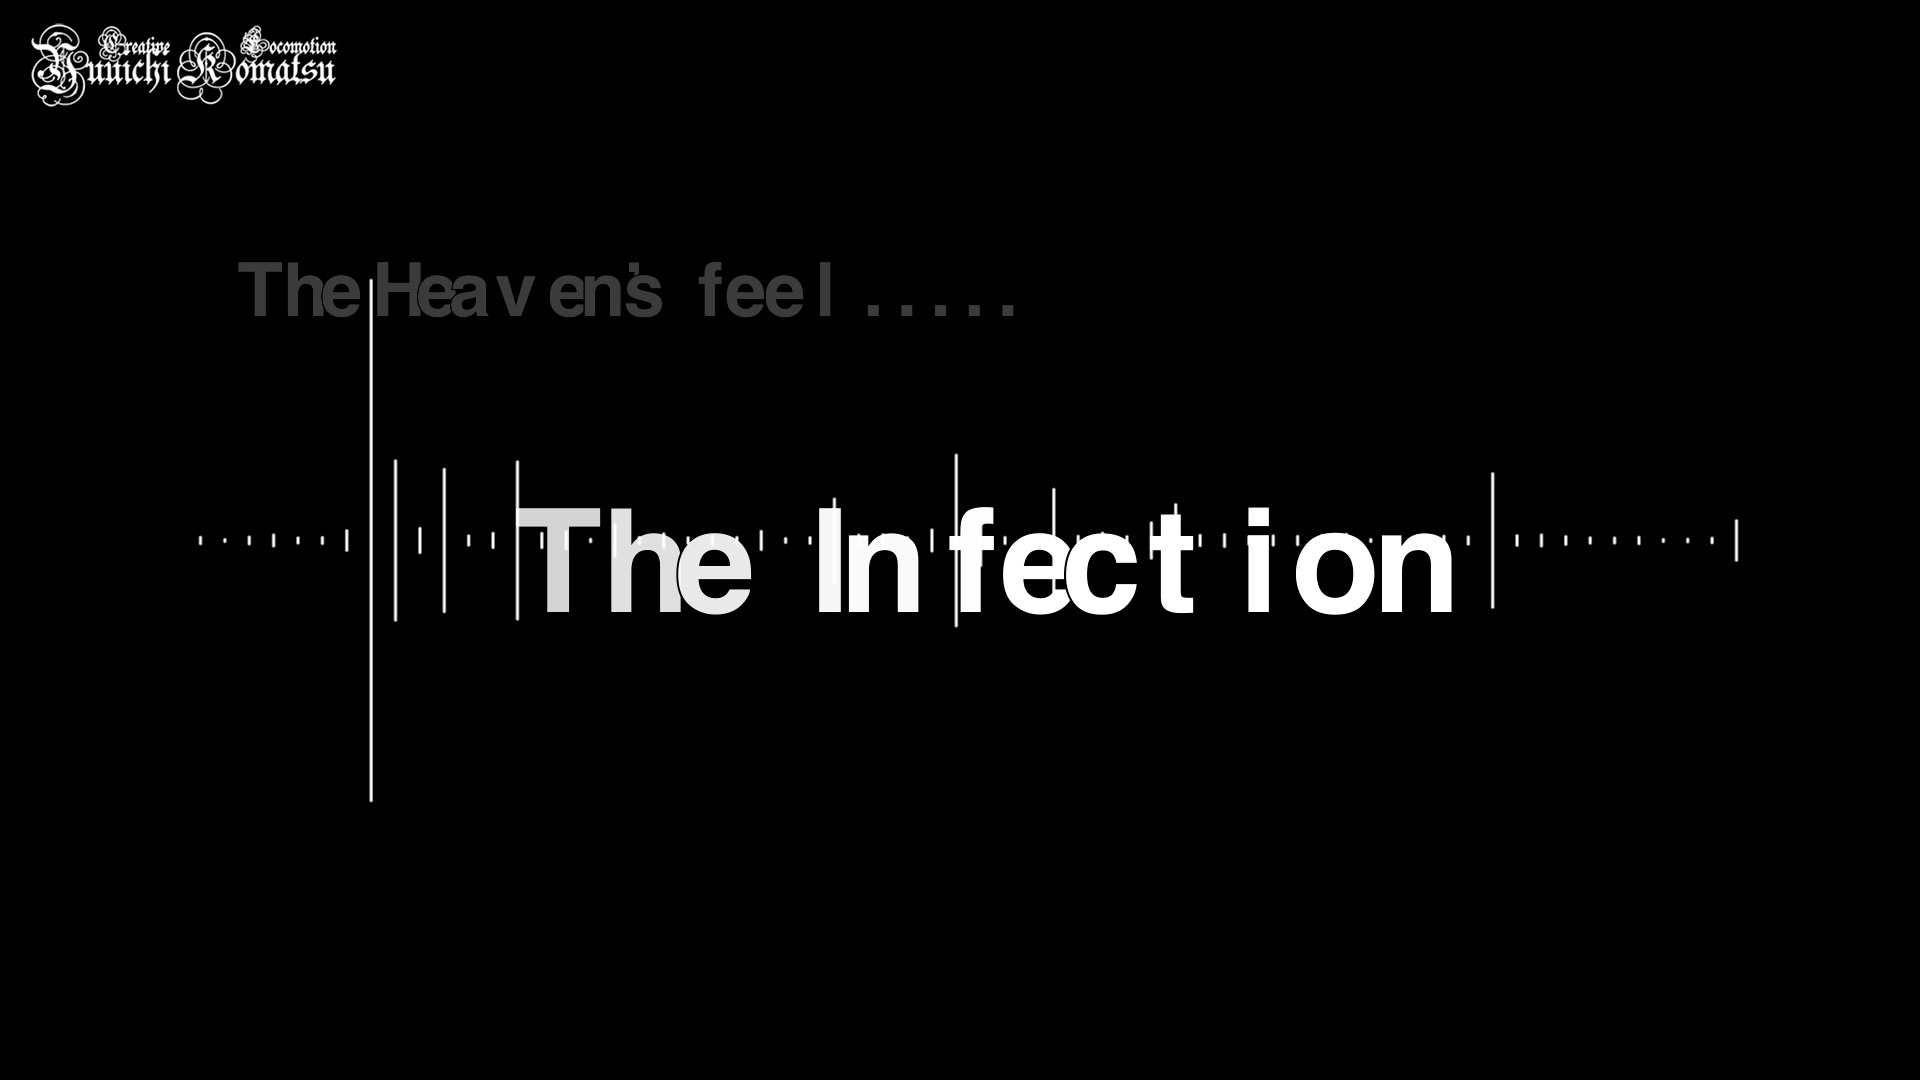 The infection